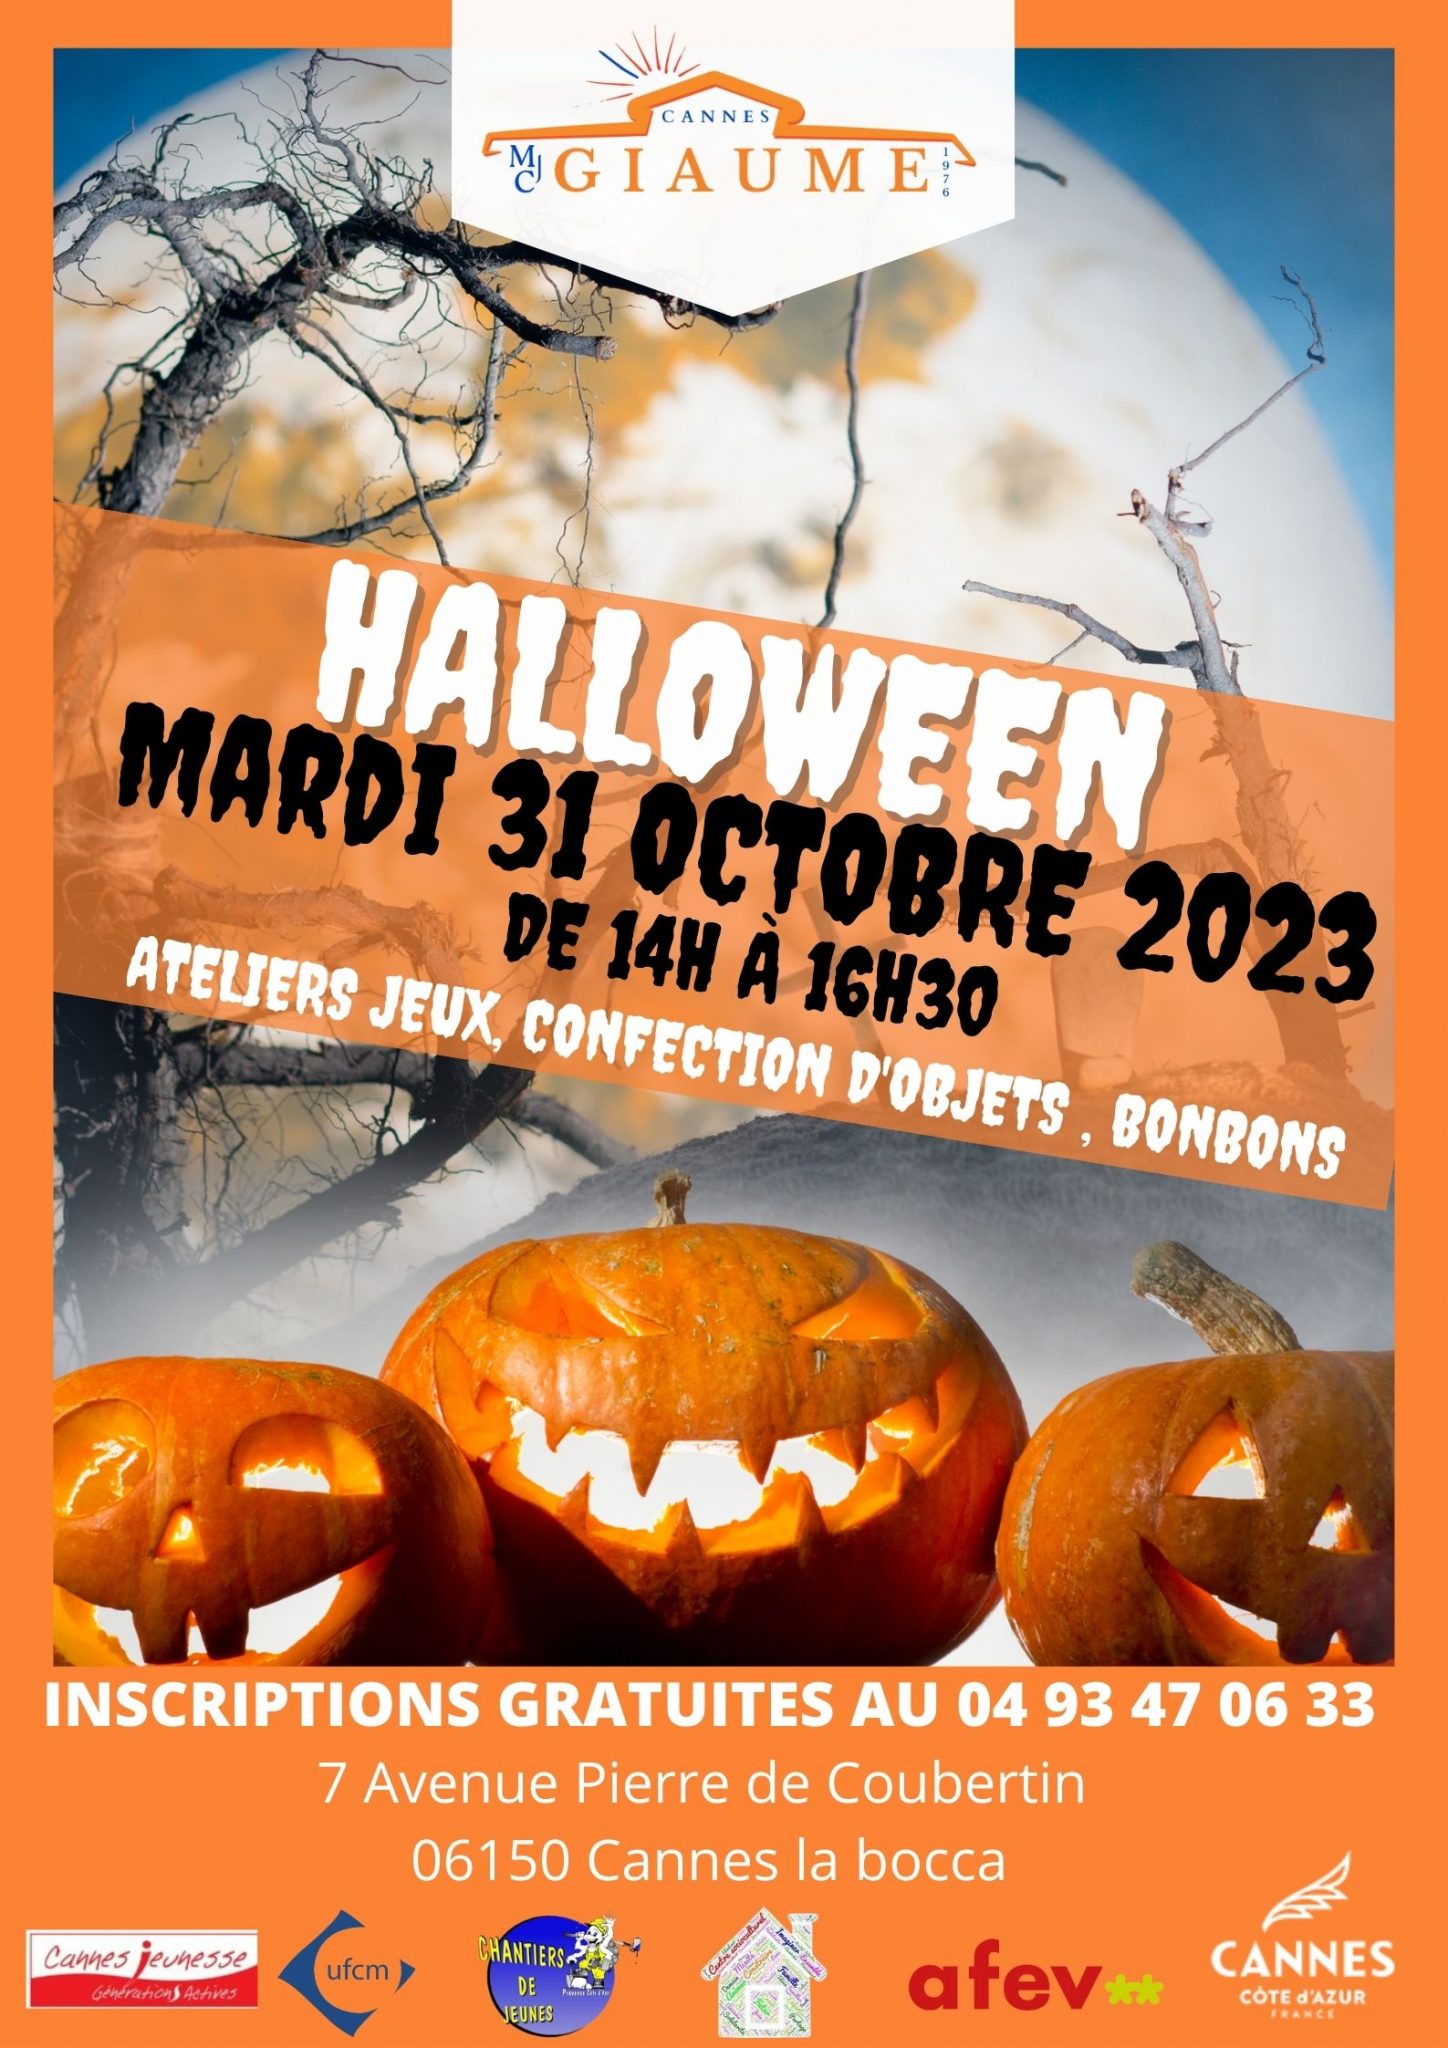 Halloween mjc giaume cannes 2023